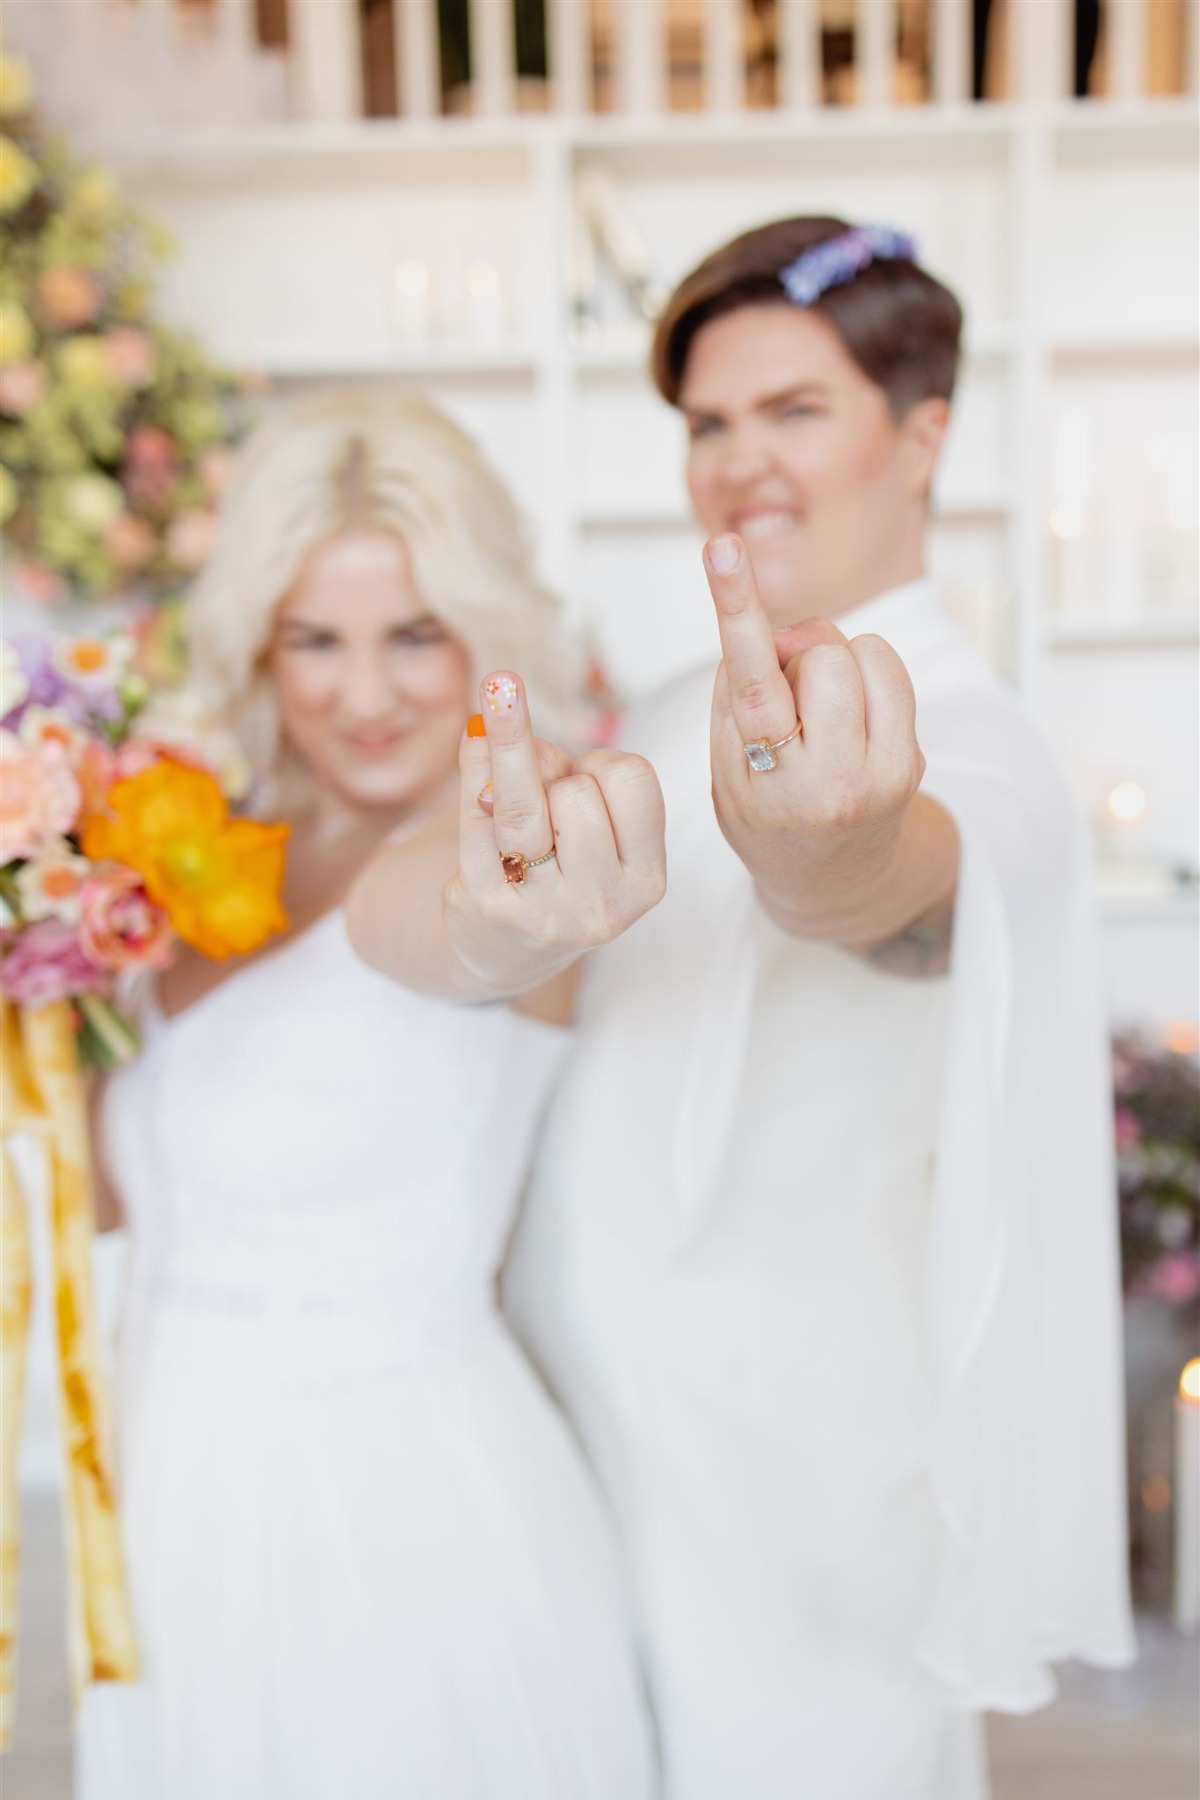 Funny colorful wedding ring photos